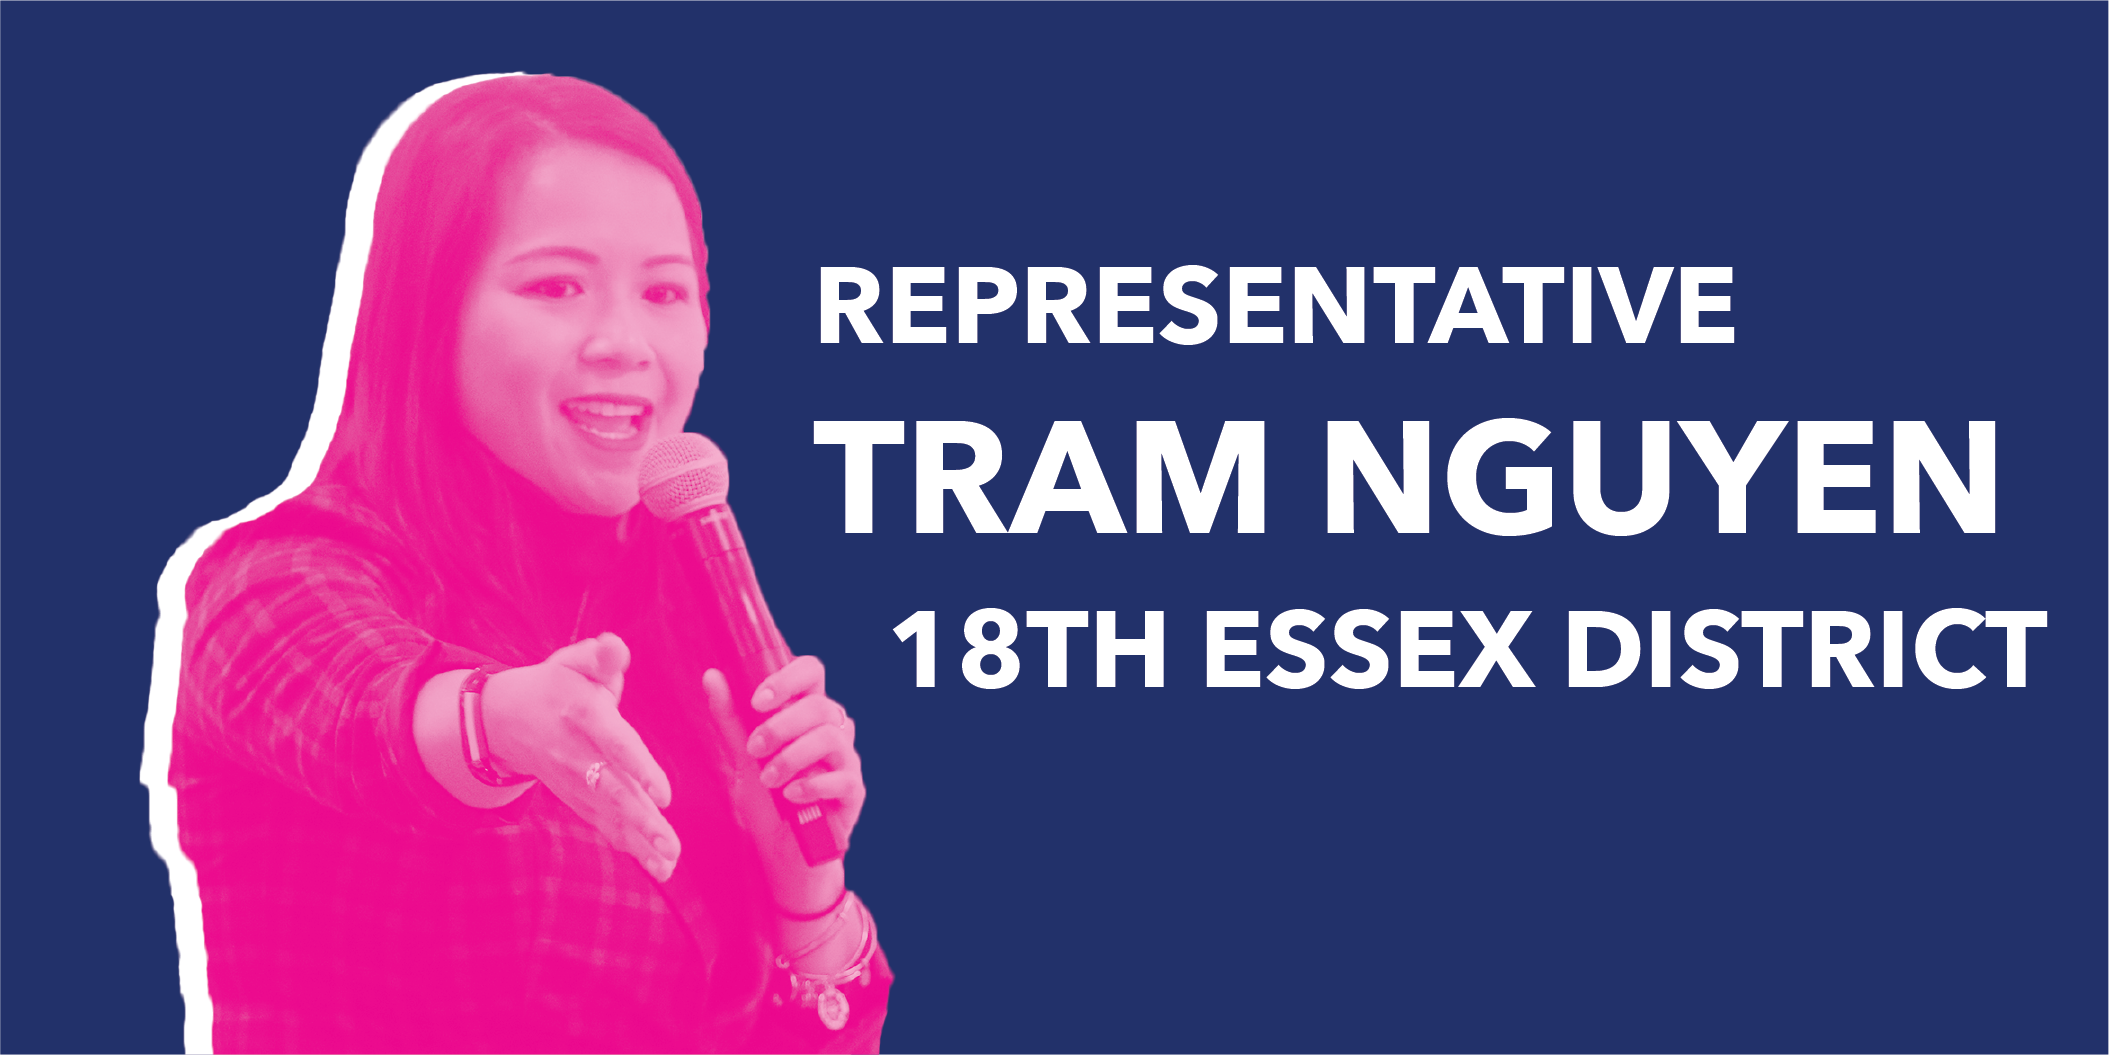 Picture of Representative Tram Nguyen with the words "REPRESENTATIVE TRAM NGUYEN 18TH ESSEX DISTRICT" next to her